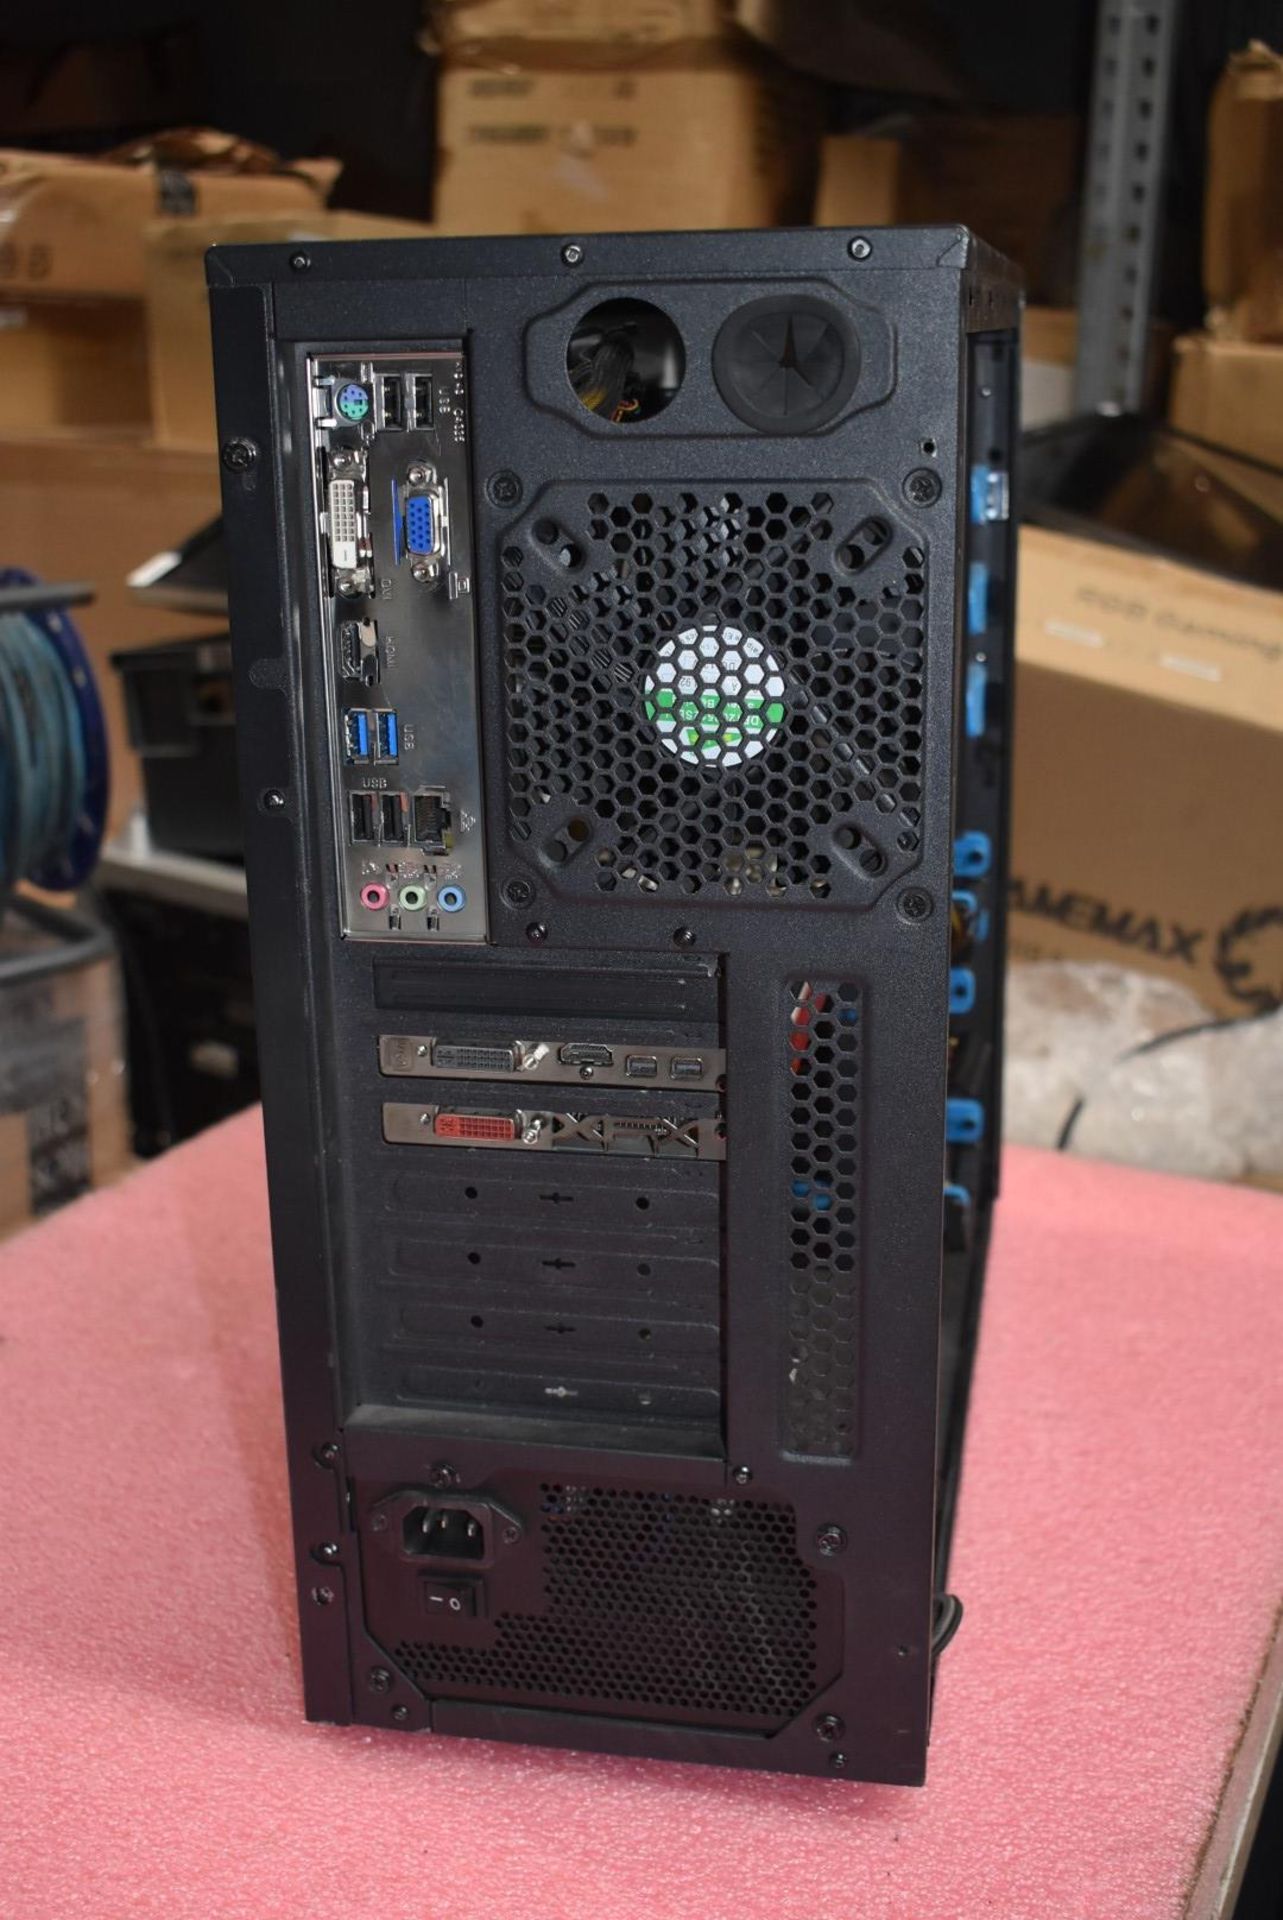 1 x Desktop Gaming PC Featuring an AMD FX6300 Processor, 12GB Ram and an XFX Radeon 7890 Graphics - Image 10 of 10